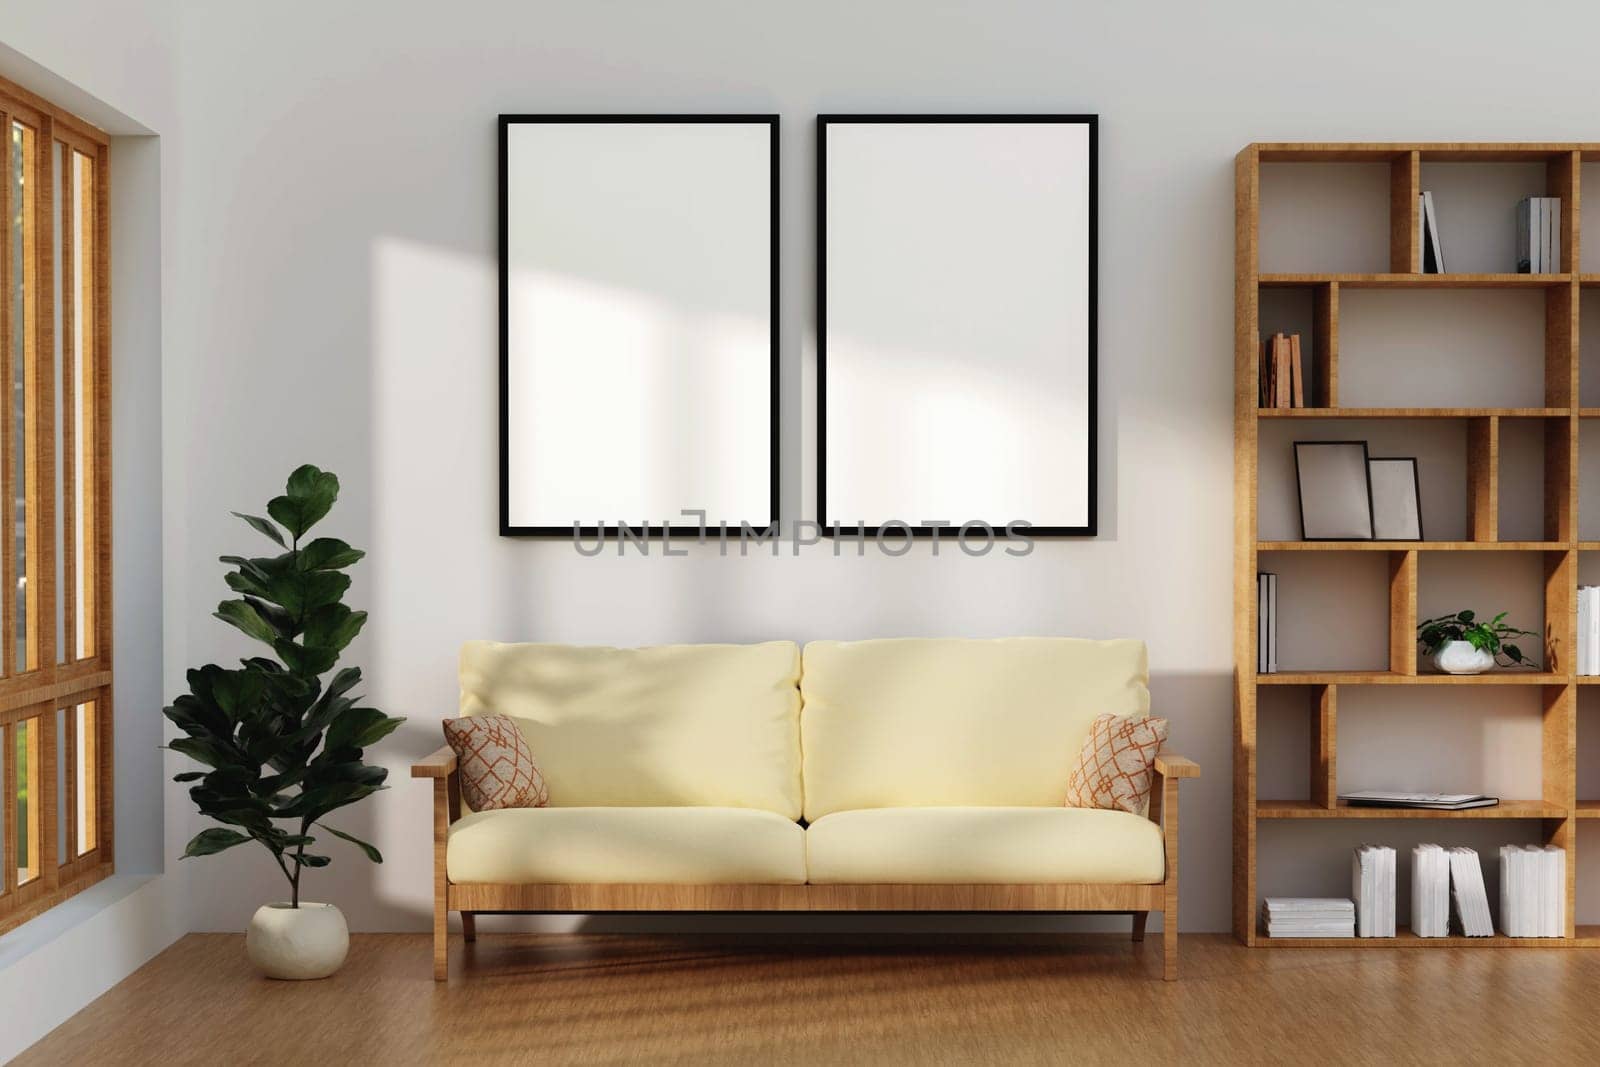 Blank horizontal poster frame mock up in living room interior, modern living room interior background, beige sofa. 3d rendering illustration by meepiangraphic